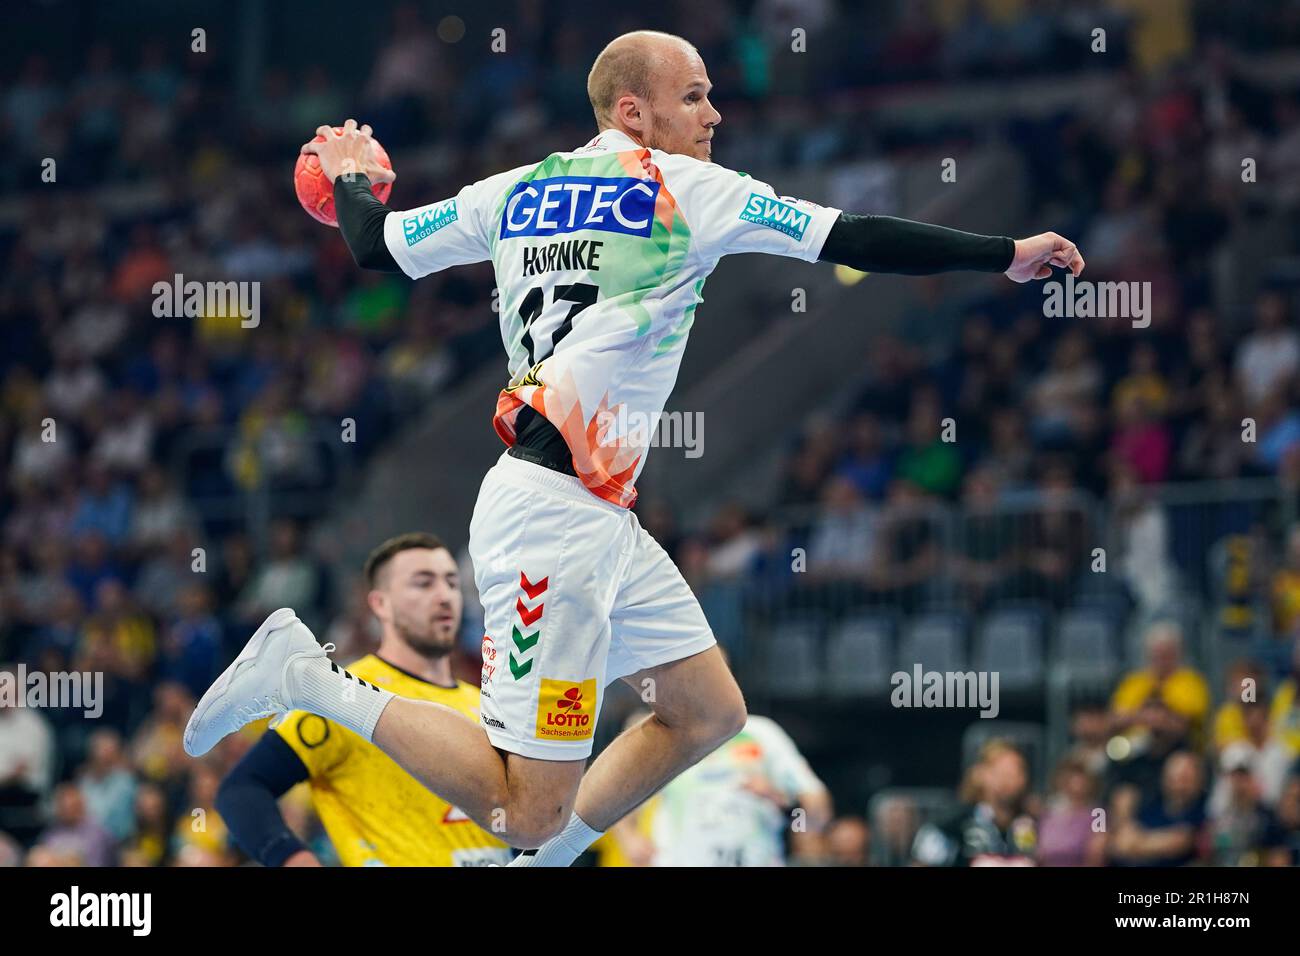 Bennet Wiegert looking for second EHF European League title with SC  Magdeburg in Lisbon 2022 (Video)